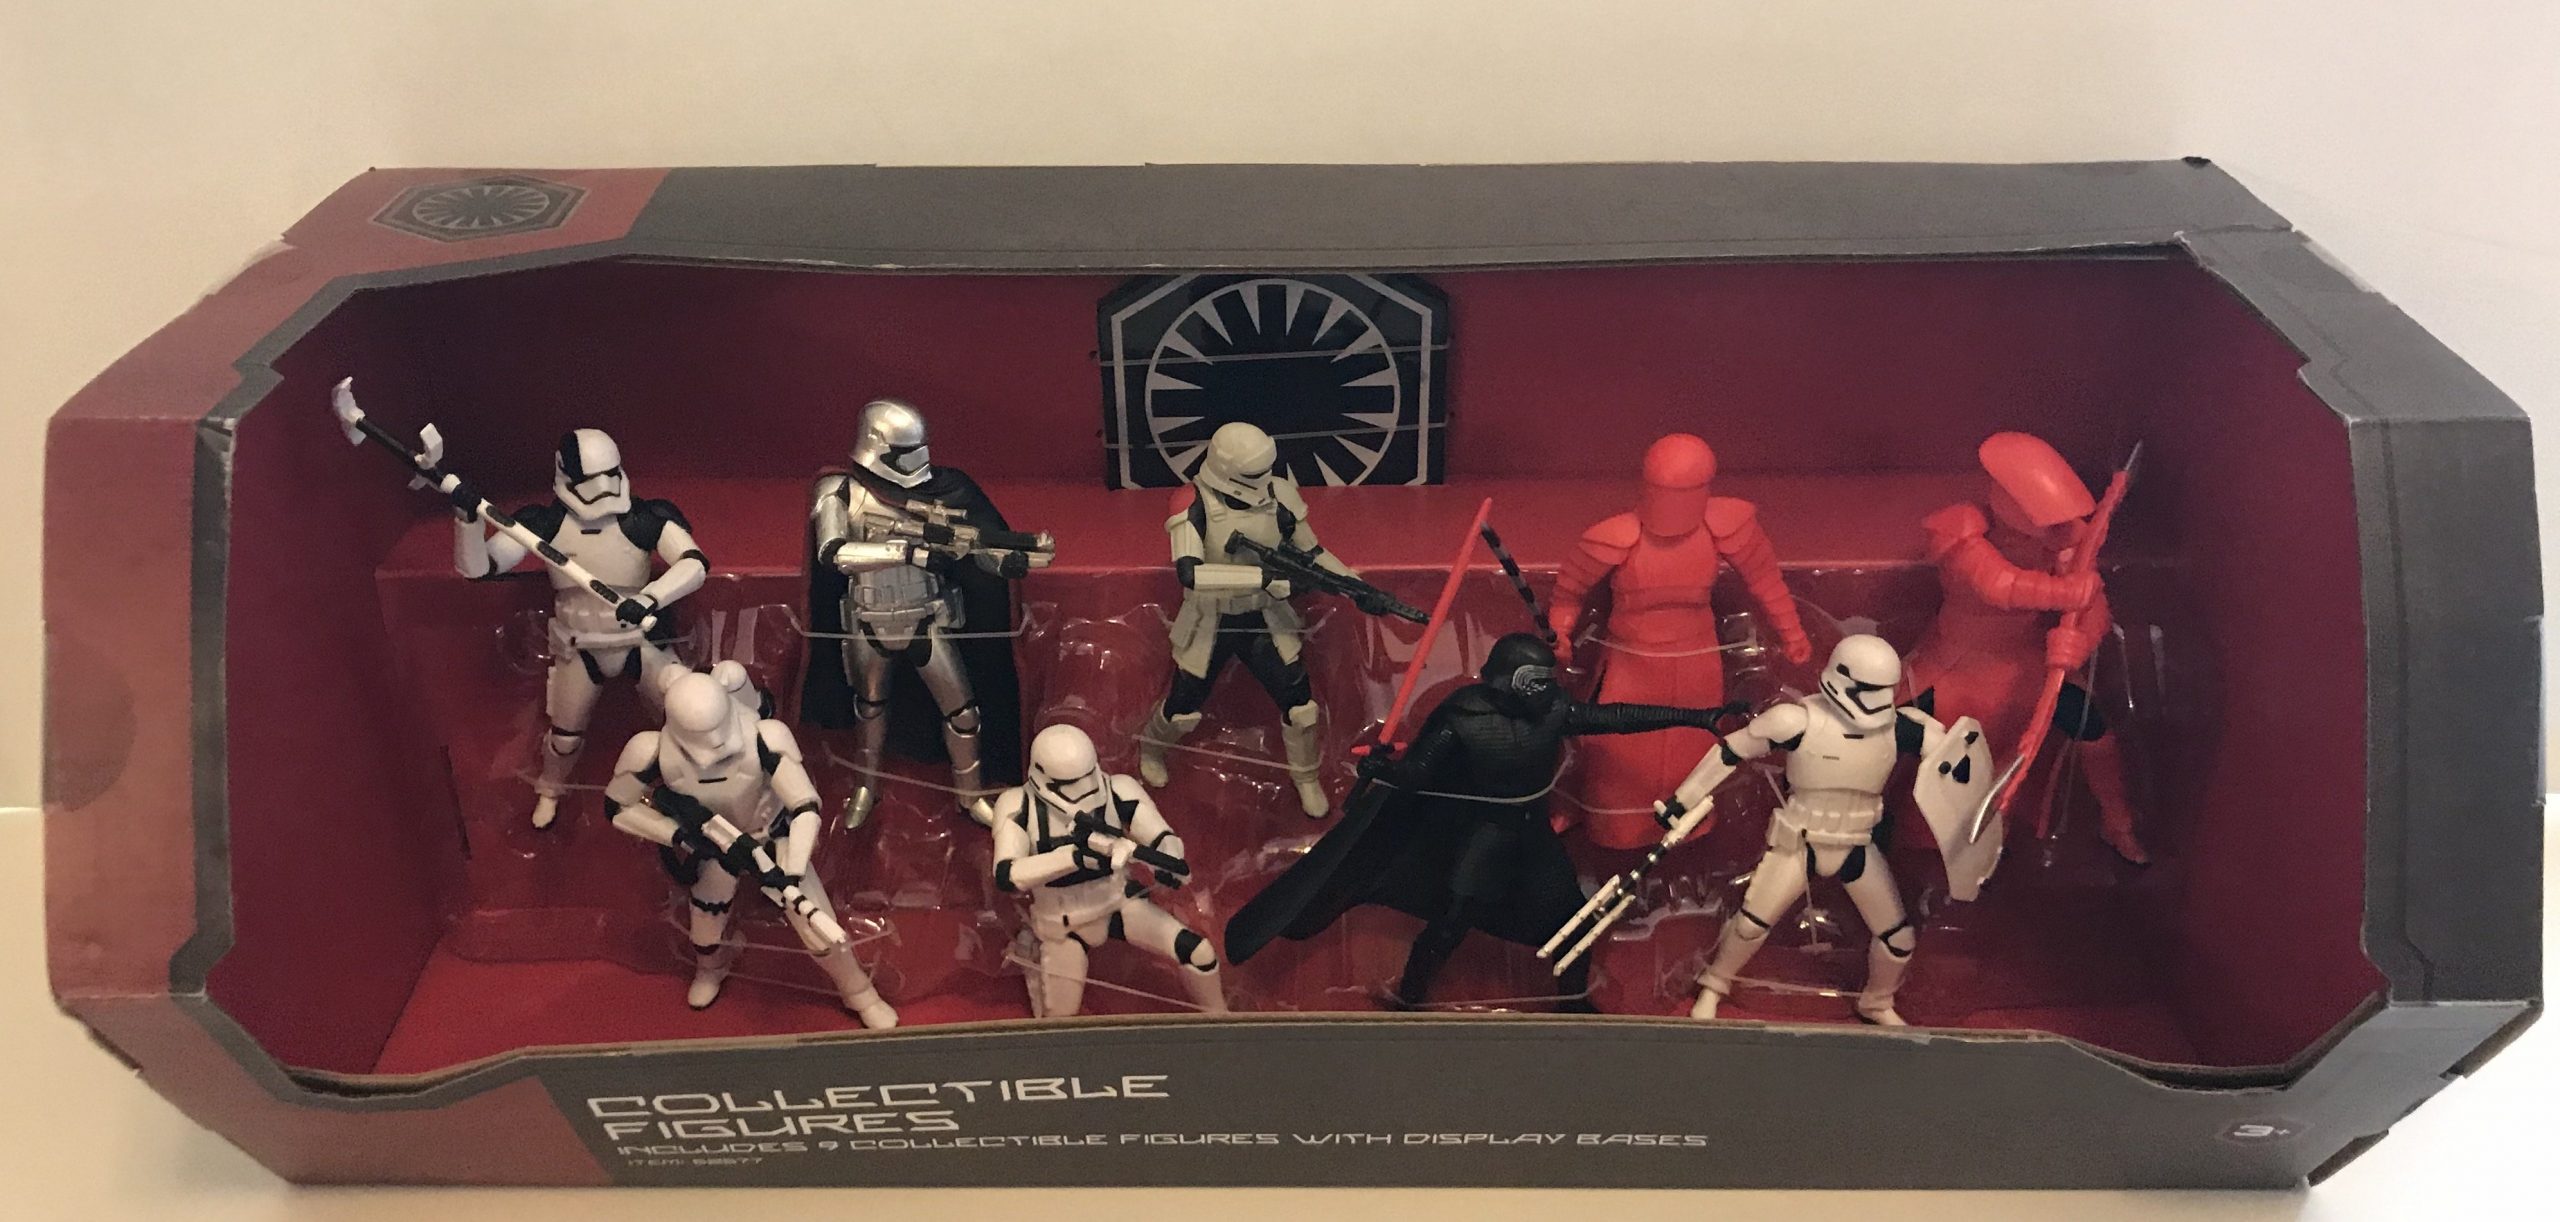 SWGE FO Collectible Figure Play Set 1